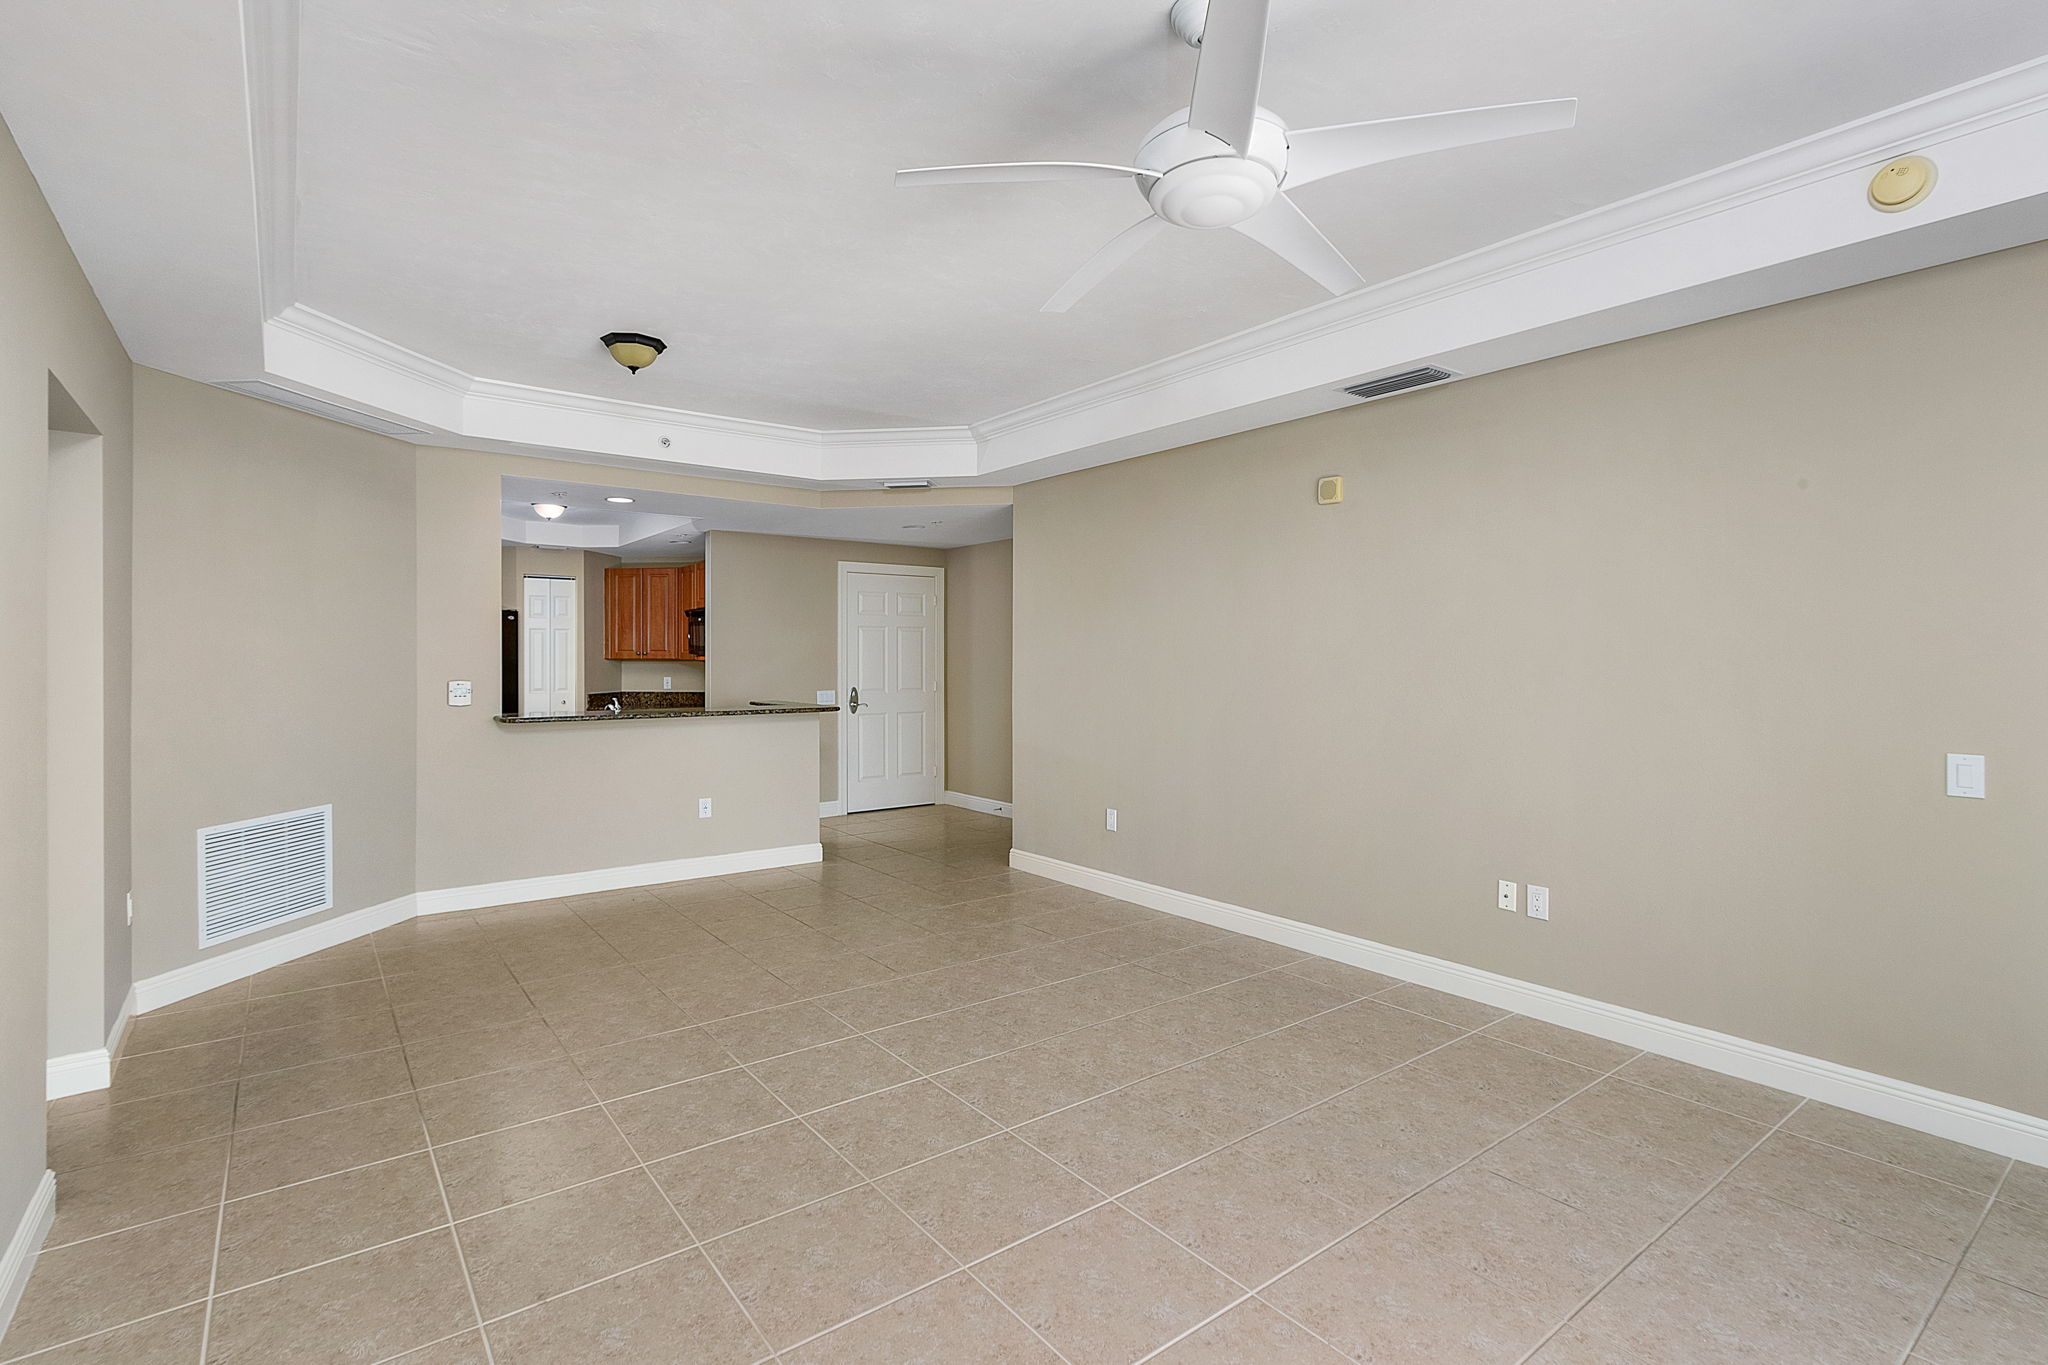  2745 First St Unit 1301, Fort Myers, FL 33916, US Photo 9